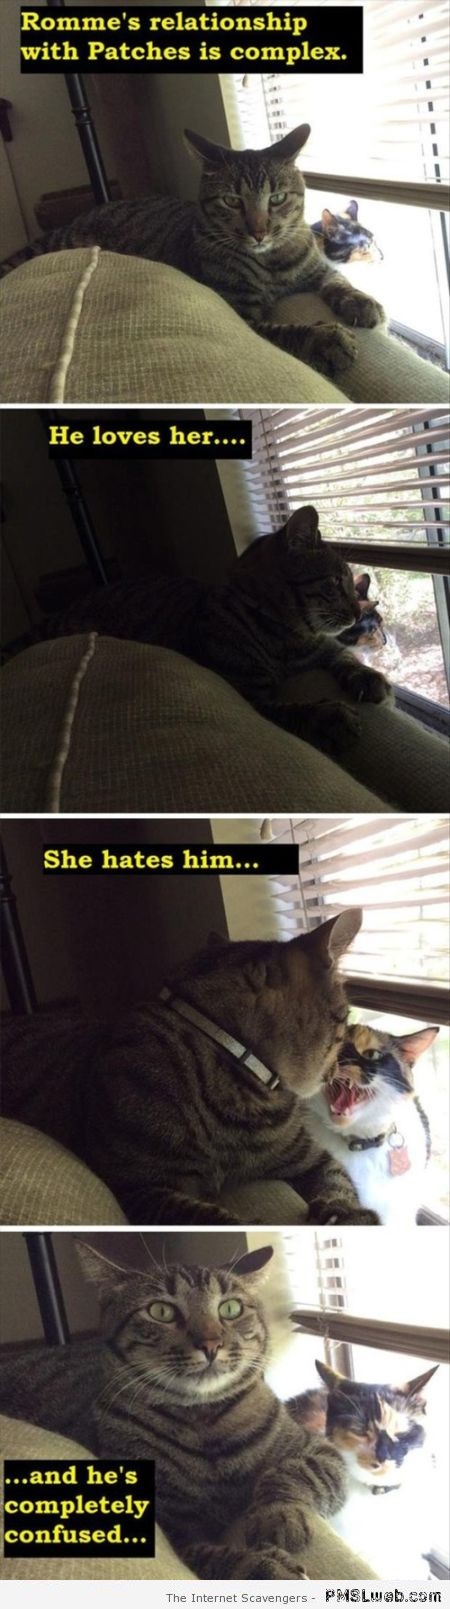 Funny complex cat relationship – Thursday guffaws at PMSLweb.com